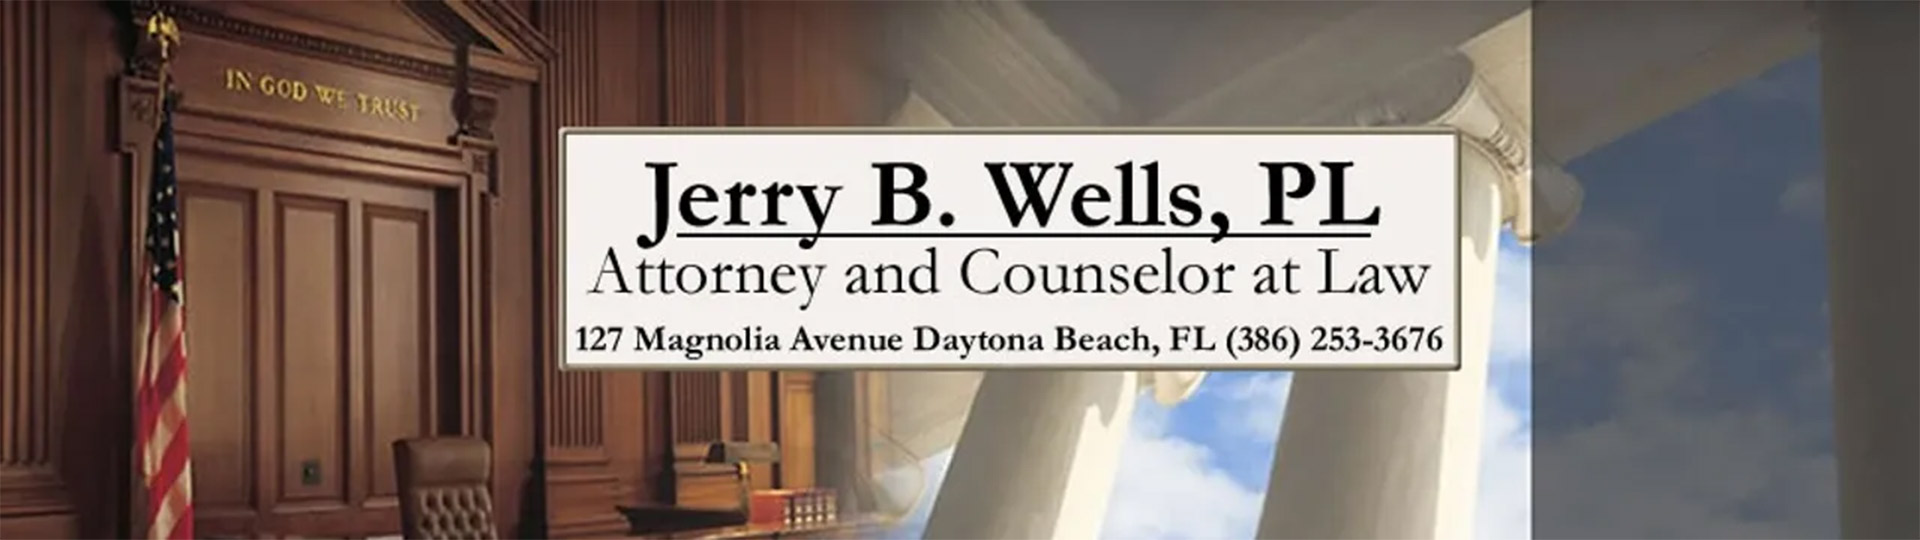 Jerry B. Wells, P.A. - Attorney and Counselor at Law